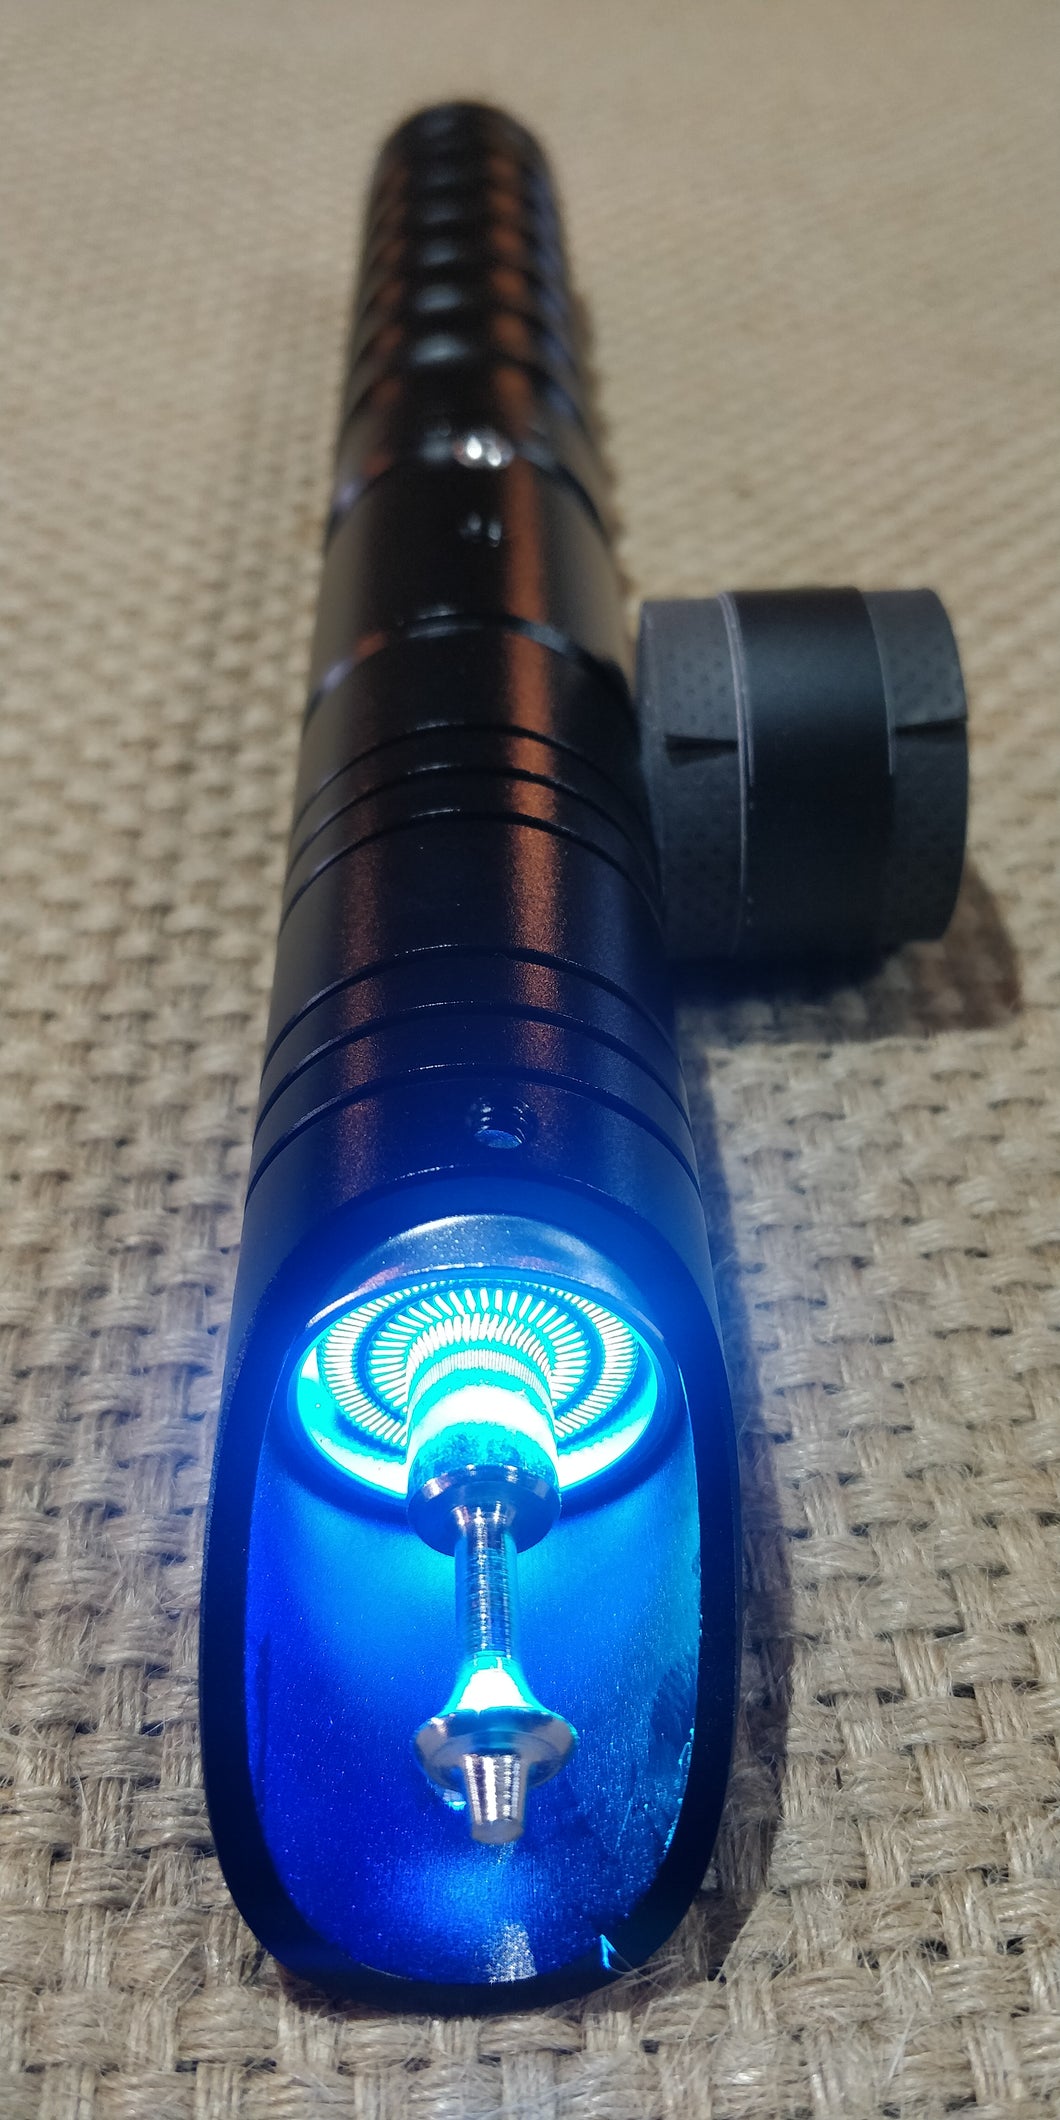 Kyberforge full dueling colour changing saber with loud bass speaker.